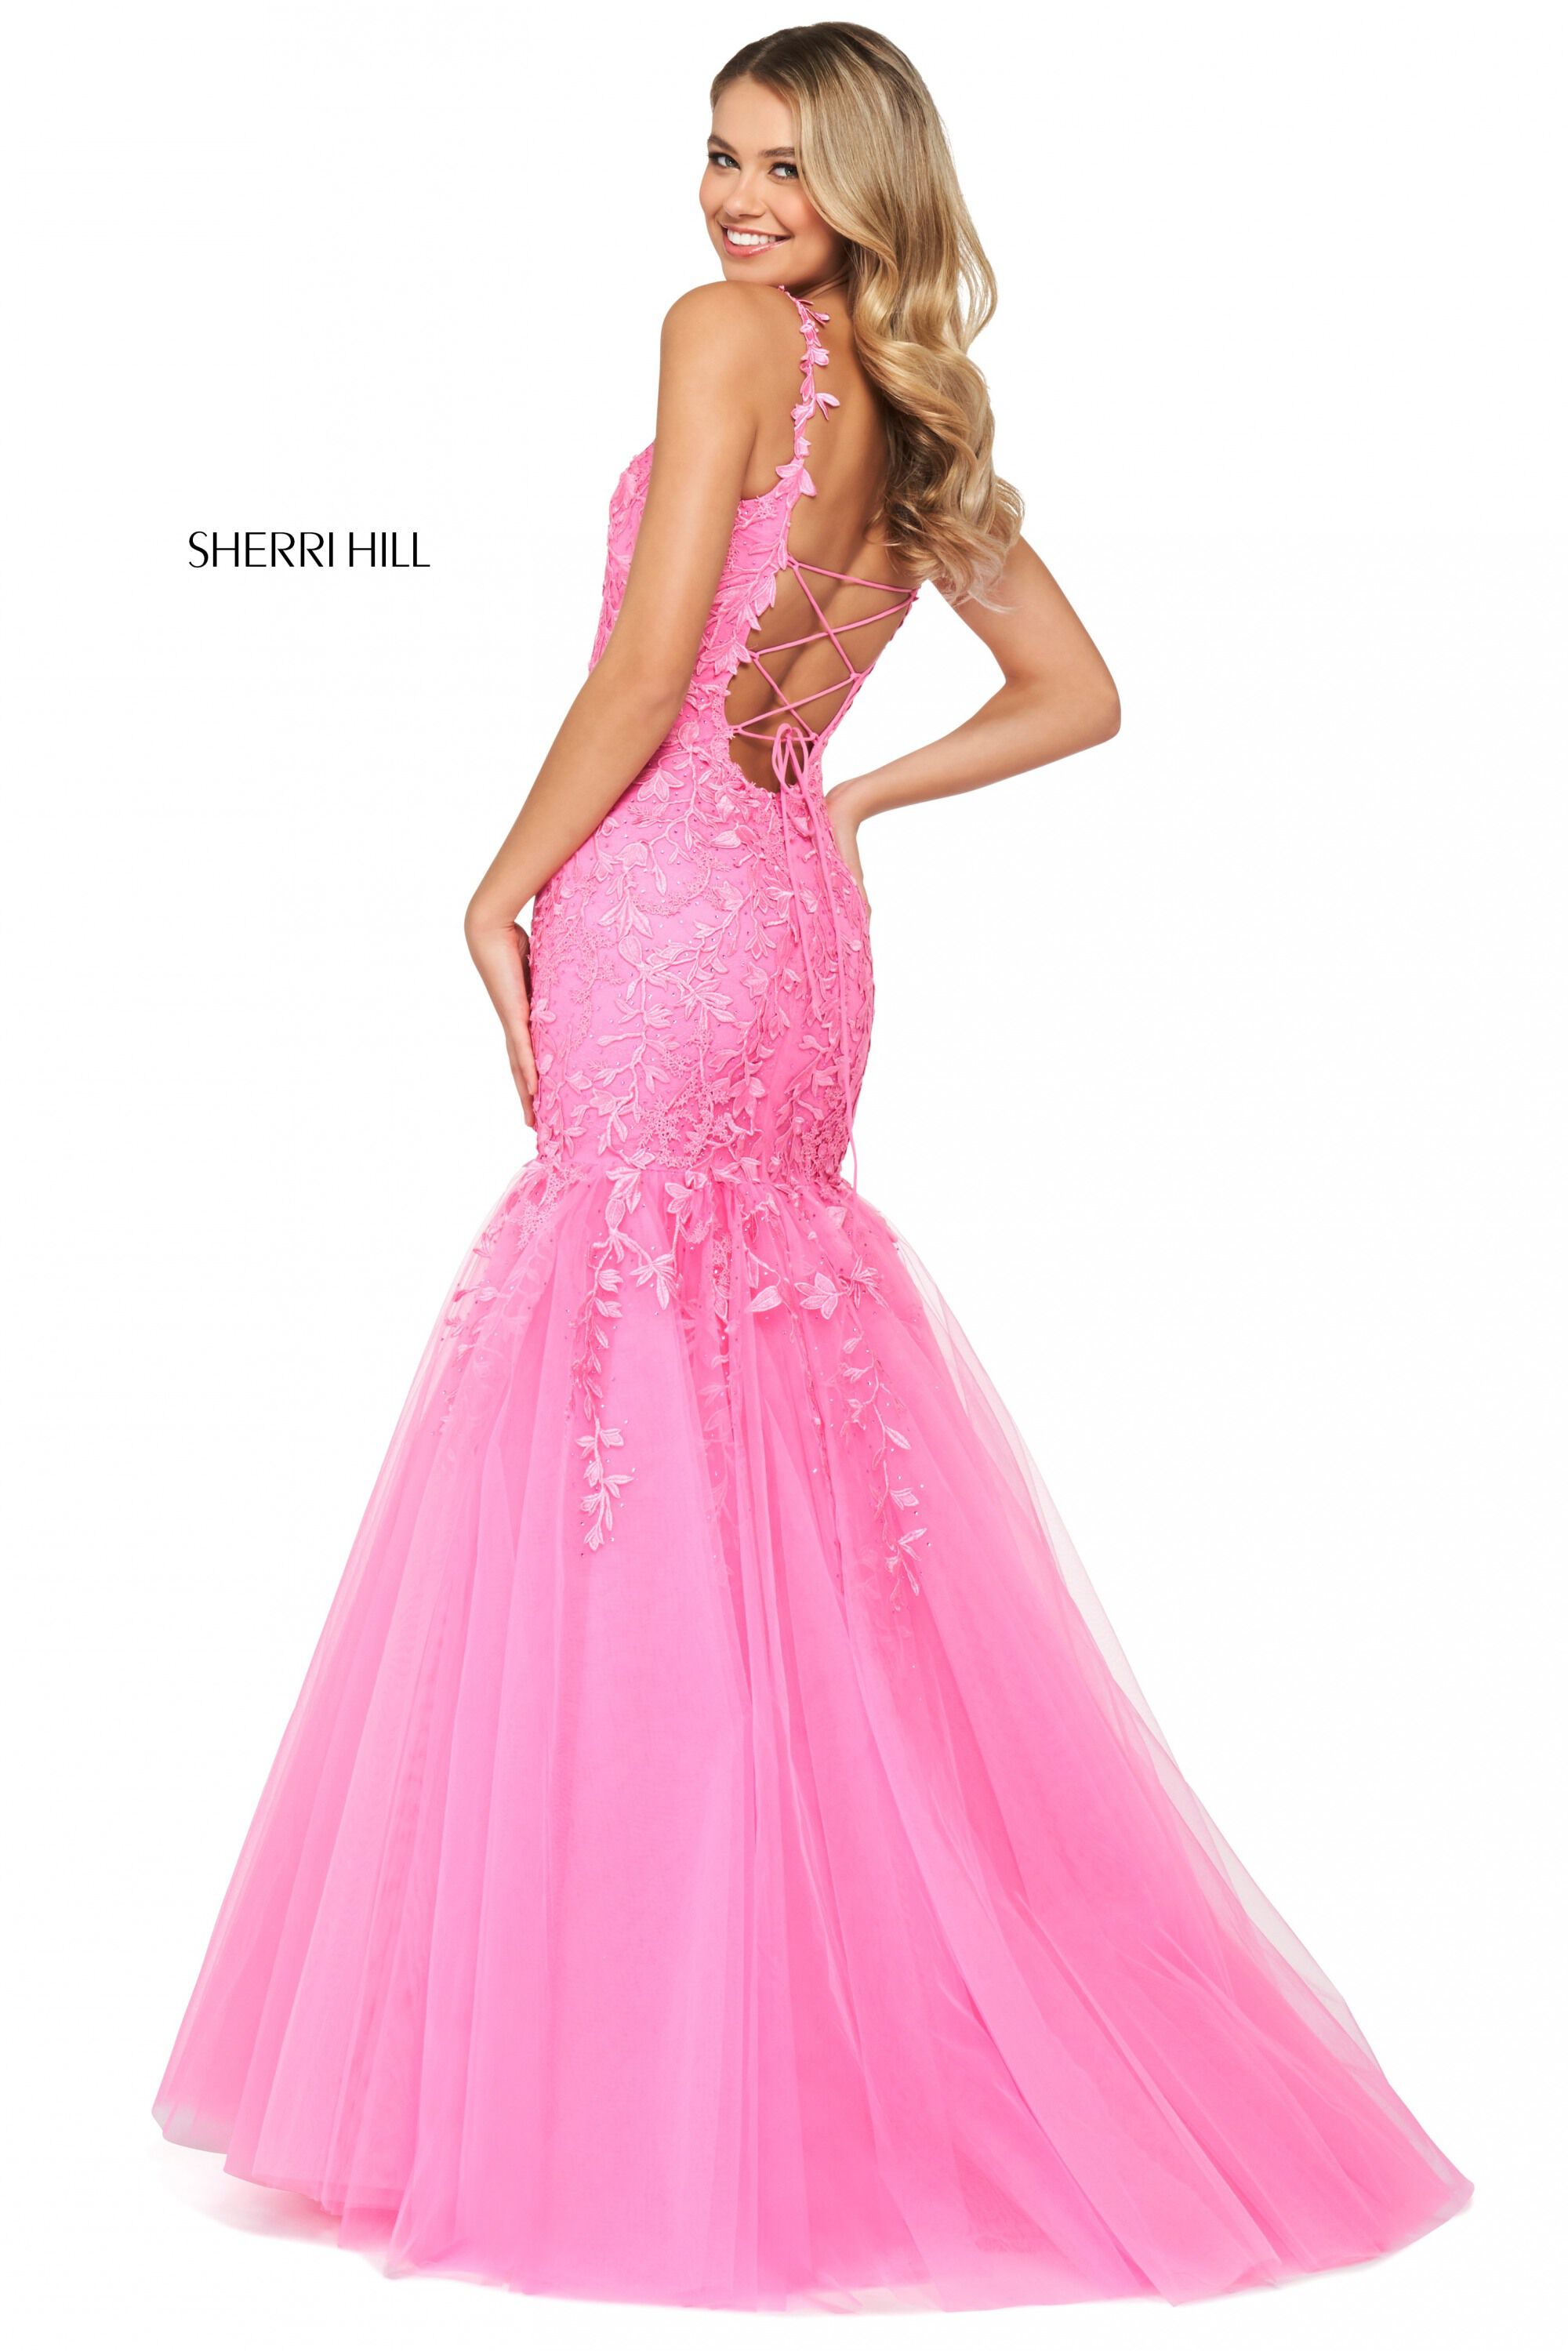 style № 53826 designed by SherriHill